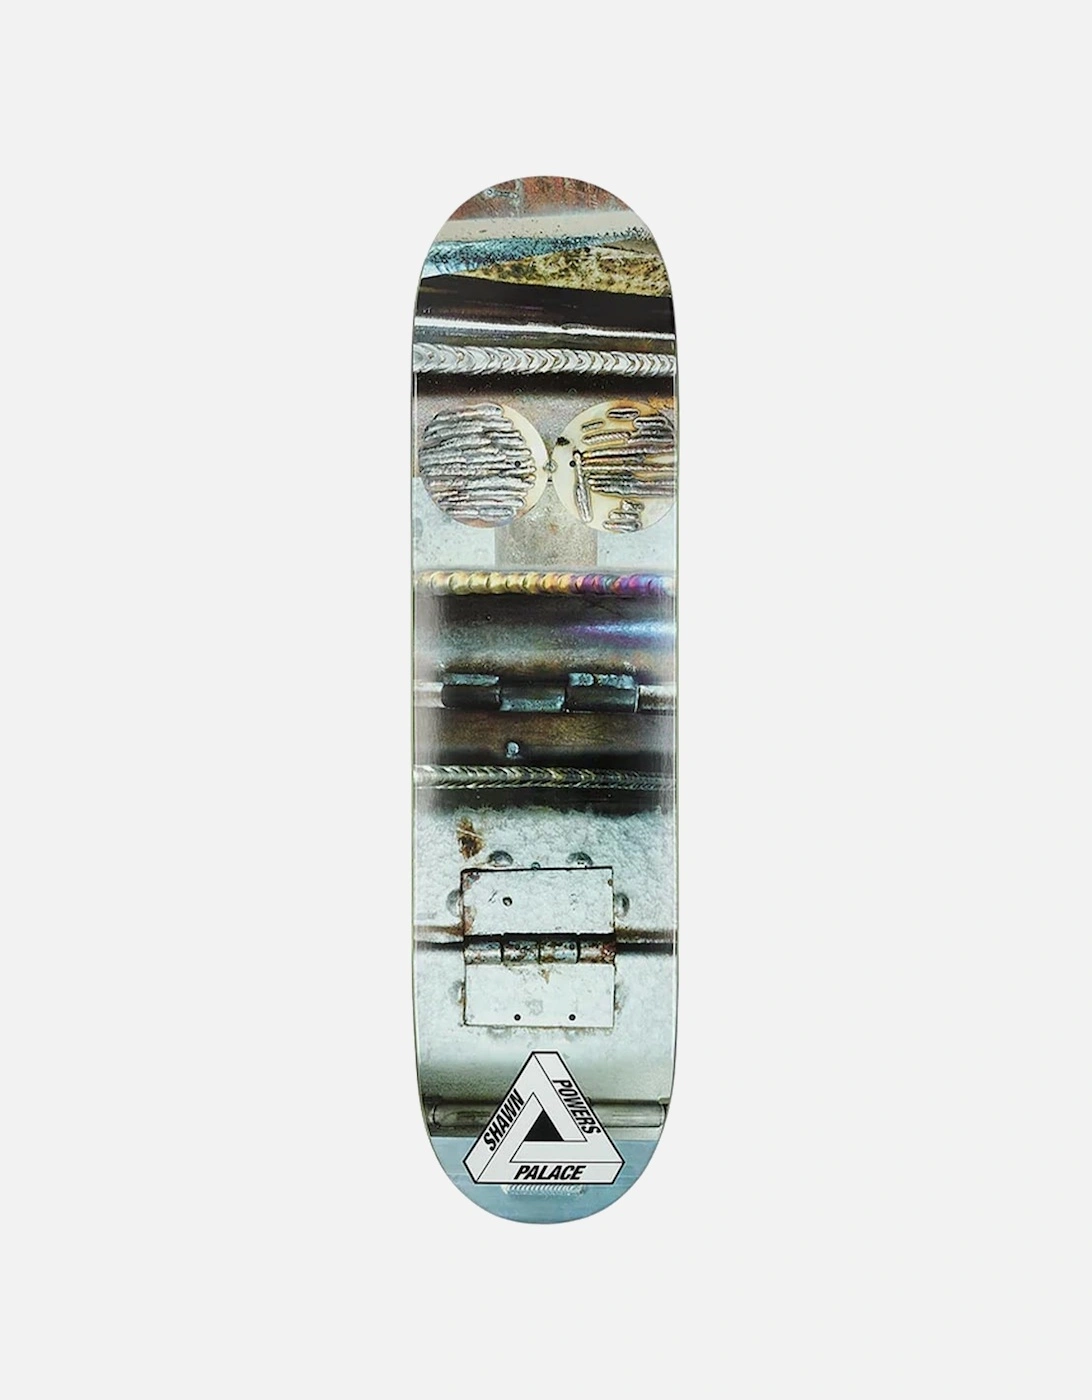 S34 Shawn Powers Deck - 8.0", 3 of 2